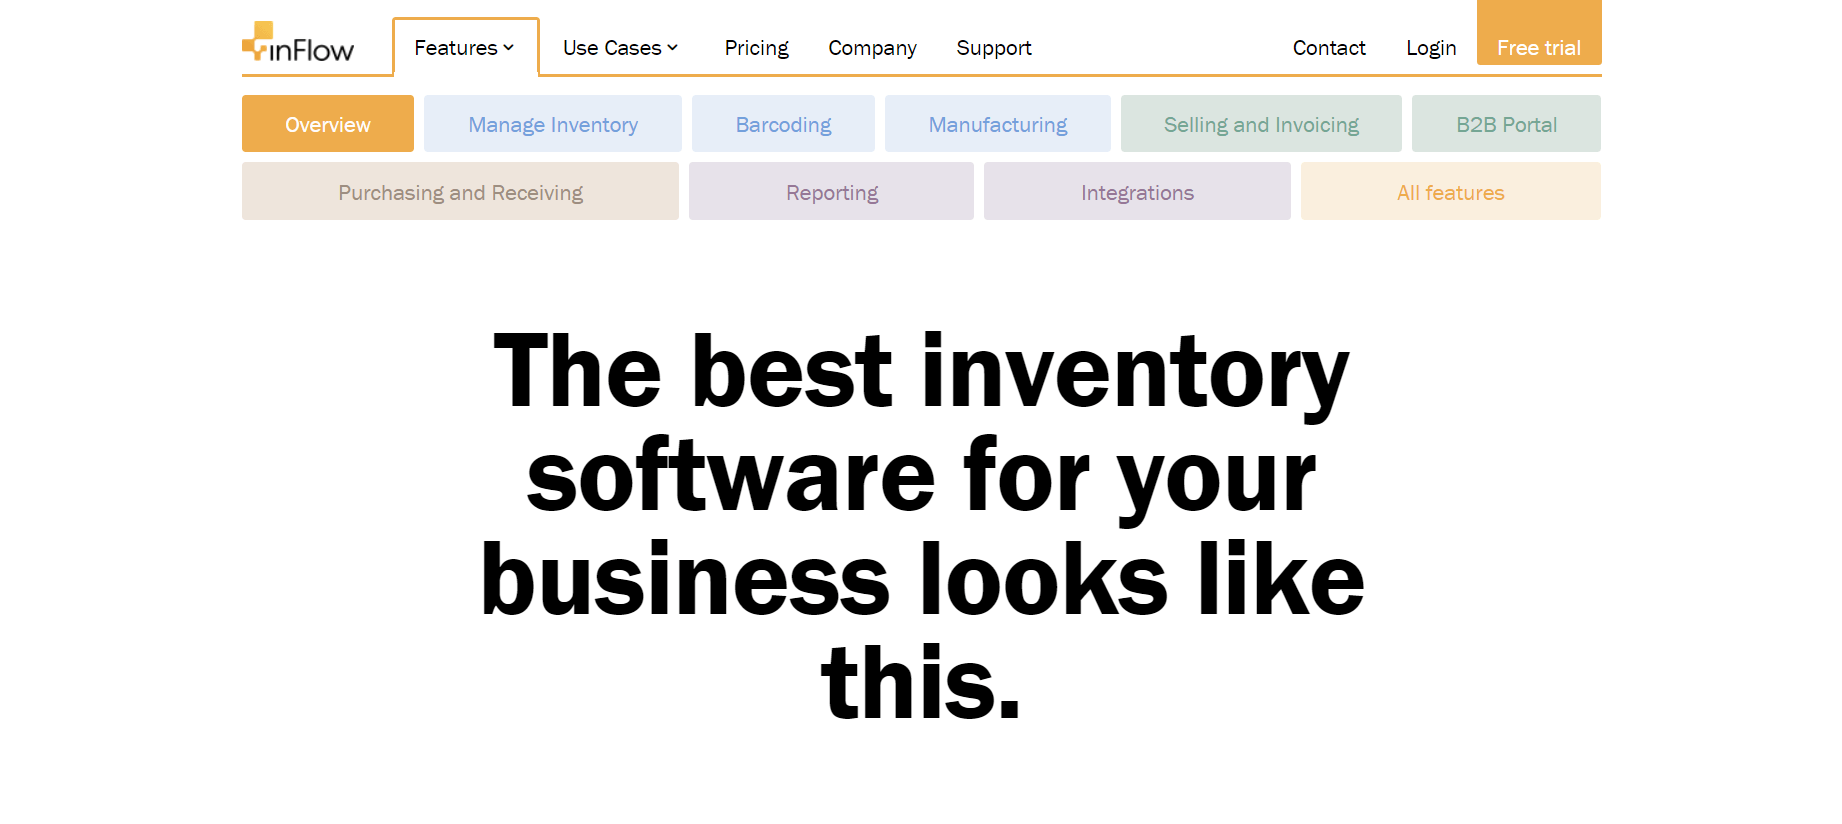 inflowinventory inventory management software